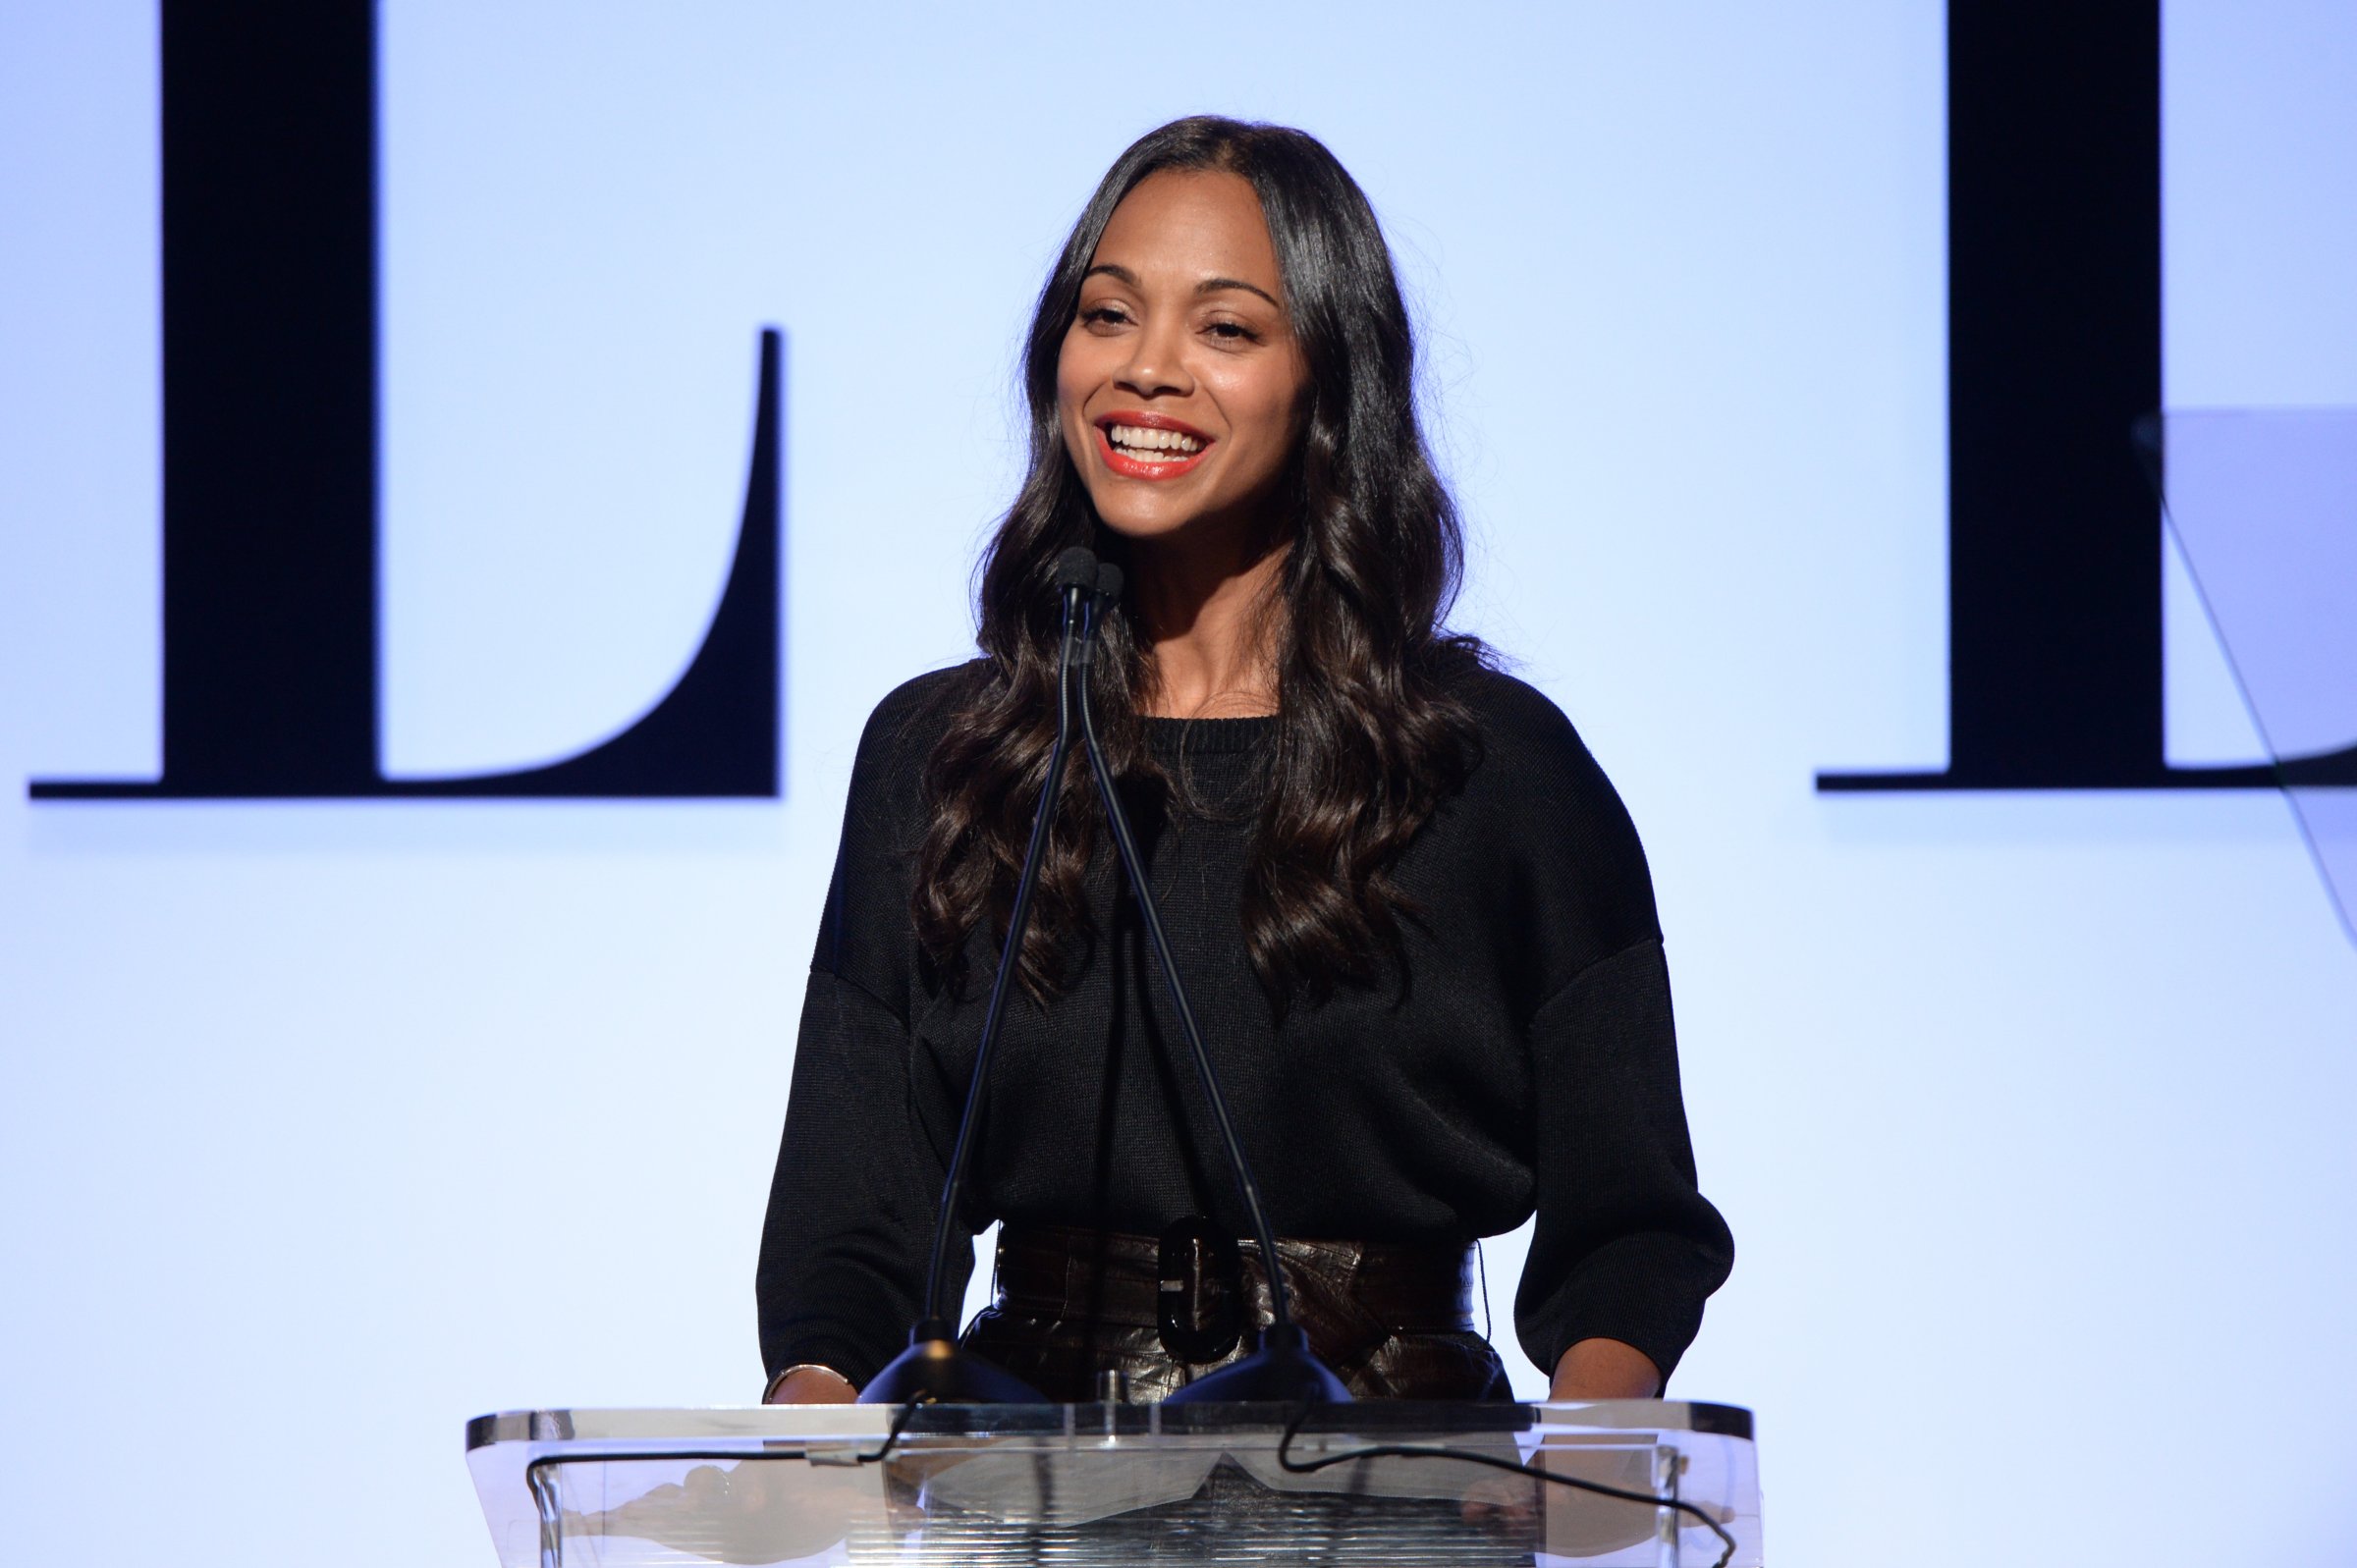 Actress Zoe Saldana speaks onstage during the 22nd Annual ELLE Women in Hollywood Awards presented by Calvin Klein Collection, L’Oréal Paris, and David Yurman at the Four Seasons Los Angeles at Beverly Hills on October 19, 2015 in Beverly Hills, California.